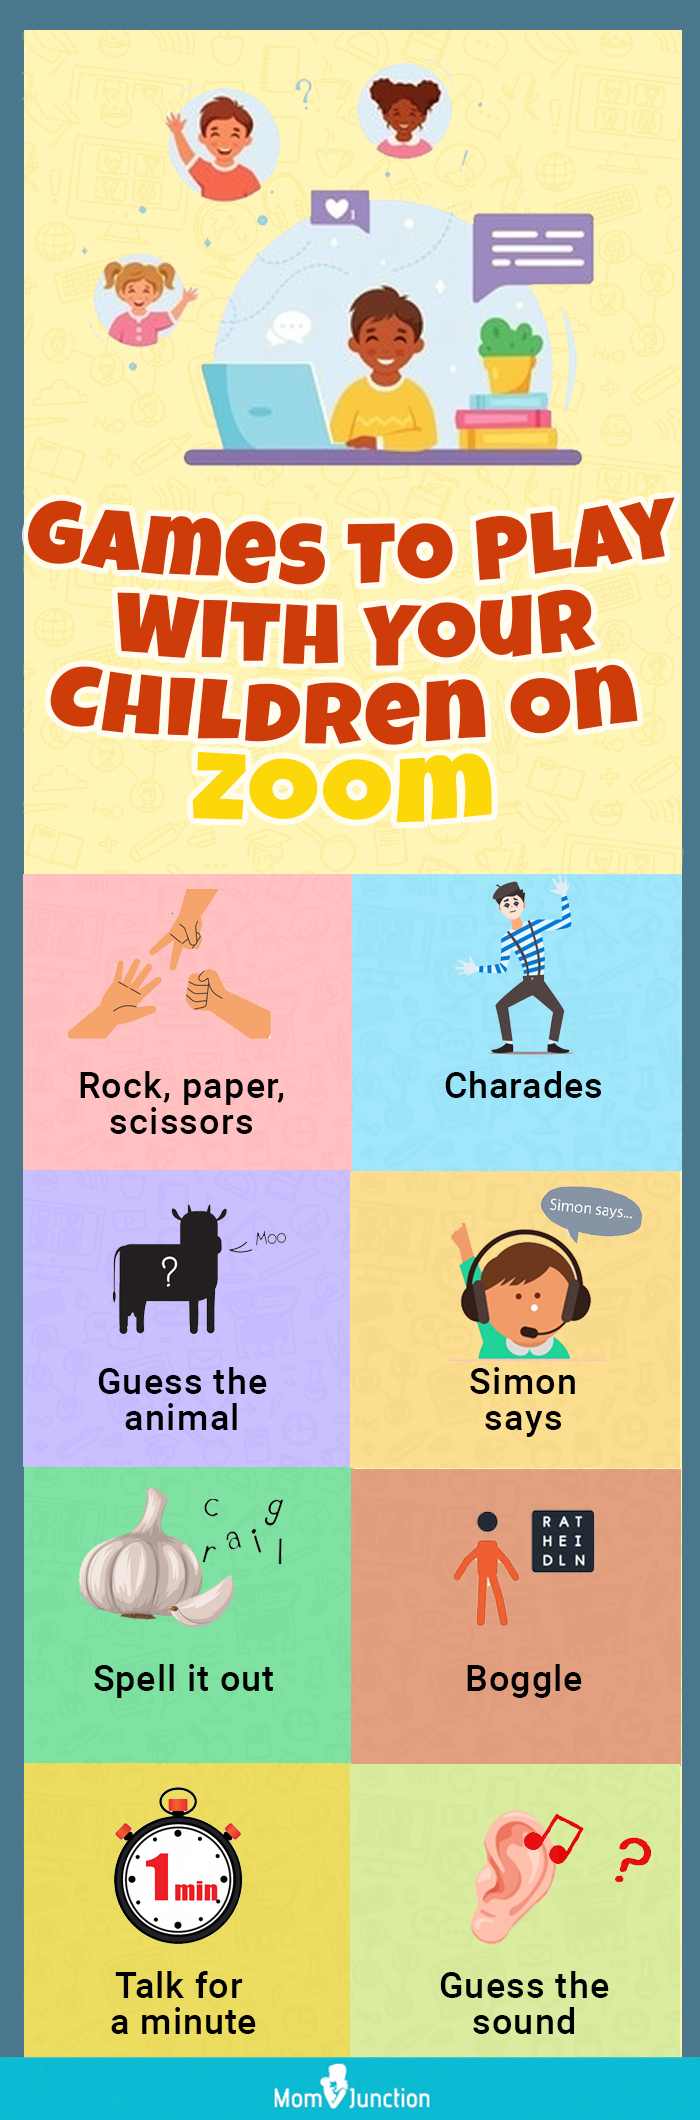 games to play with your children on zoom (infographic)